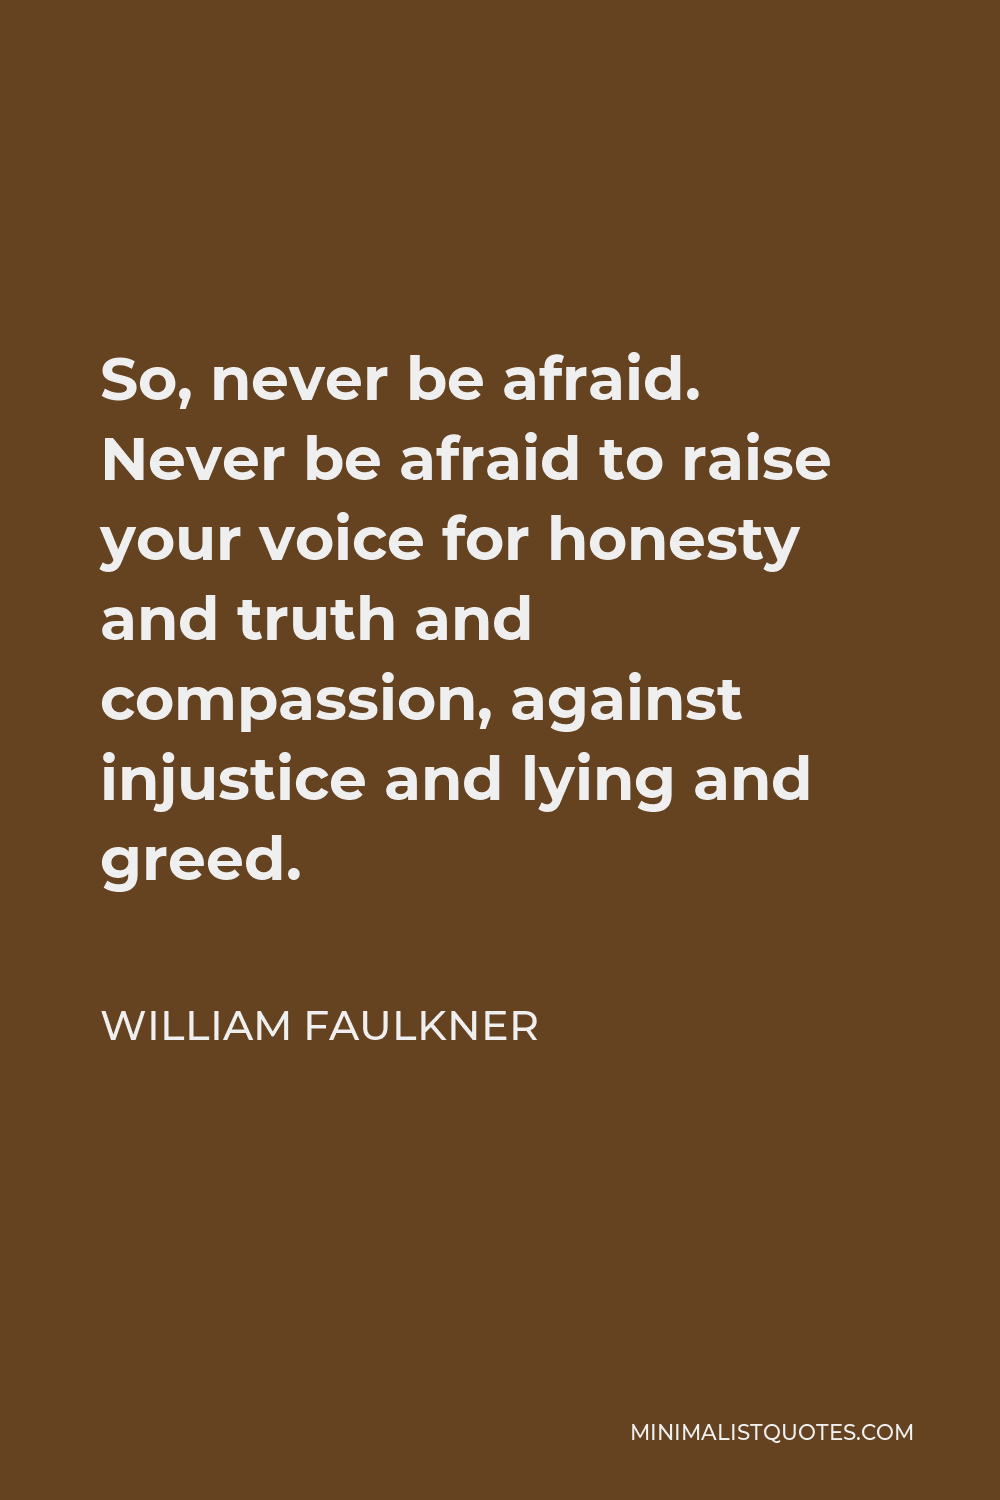 William Faulkner Quote - So, never be afraid. Never be afraid to raise your voice for honesty and truth and compassion, against injustice and lying and greed.